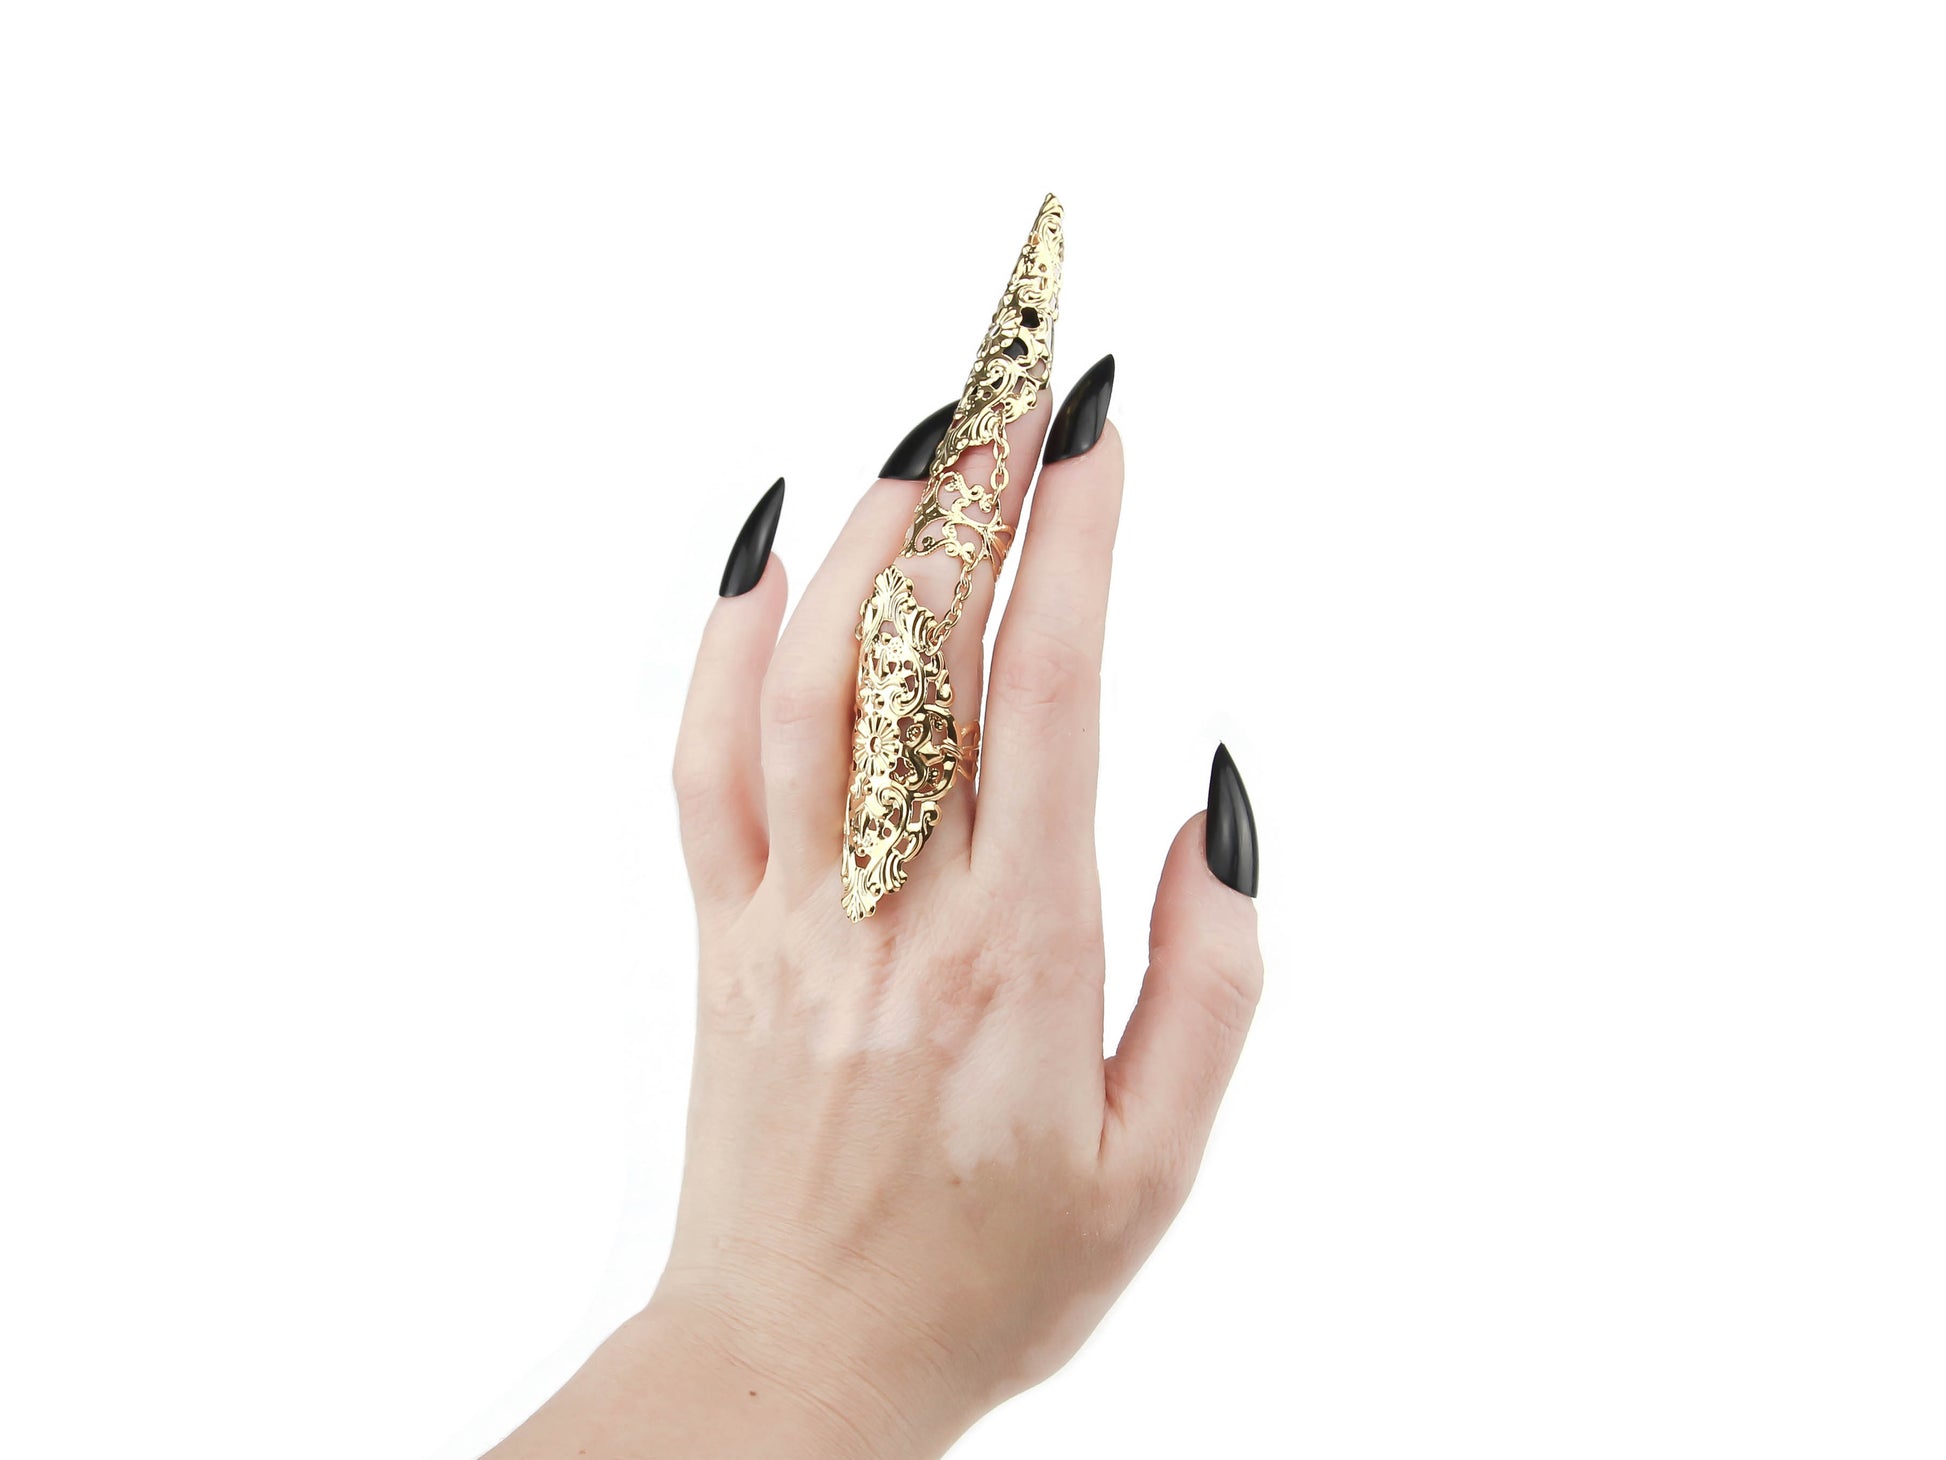 An elegant hand with black polished nails showcases a stunning Myril Jewels finger armor ring, a hallmark of dark-avantgarde style. The gold ring features elaborate filigree details, embodying the gothic and alternative aesthetic, perfect for those who dare to express their individuality with bold Italian craftsmanship.